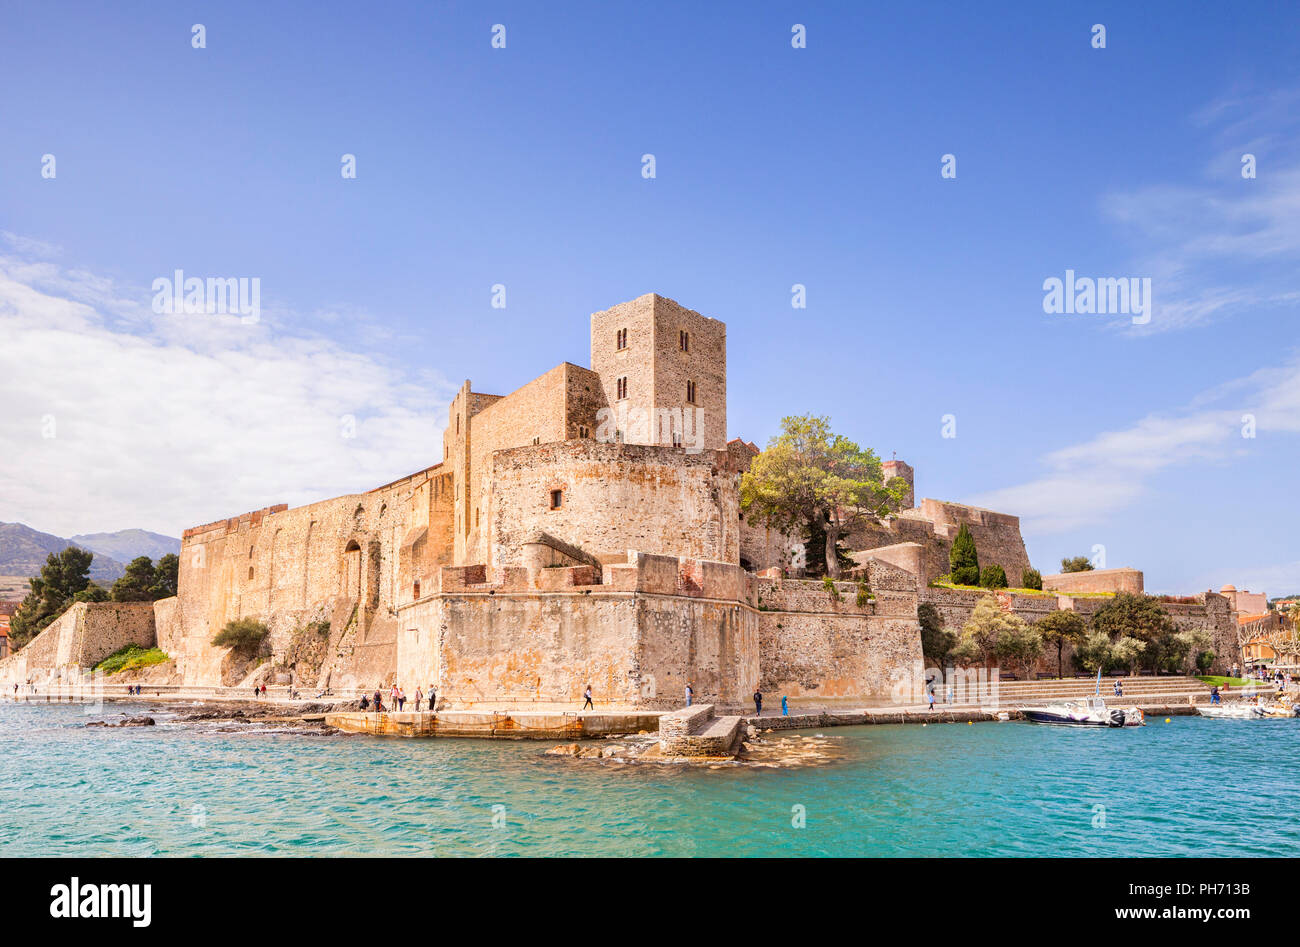 Royal Chateau, Collioure, Languedoc-Roussillon, Pyrenees-Orientales, Frankreich. Stockfoto